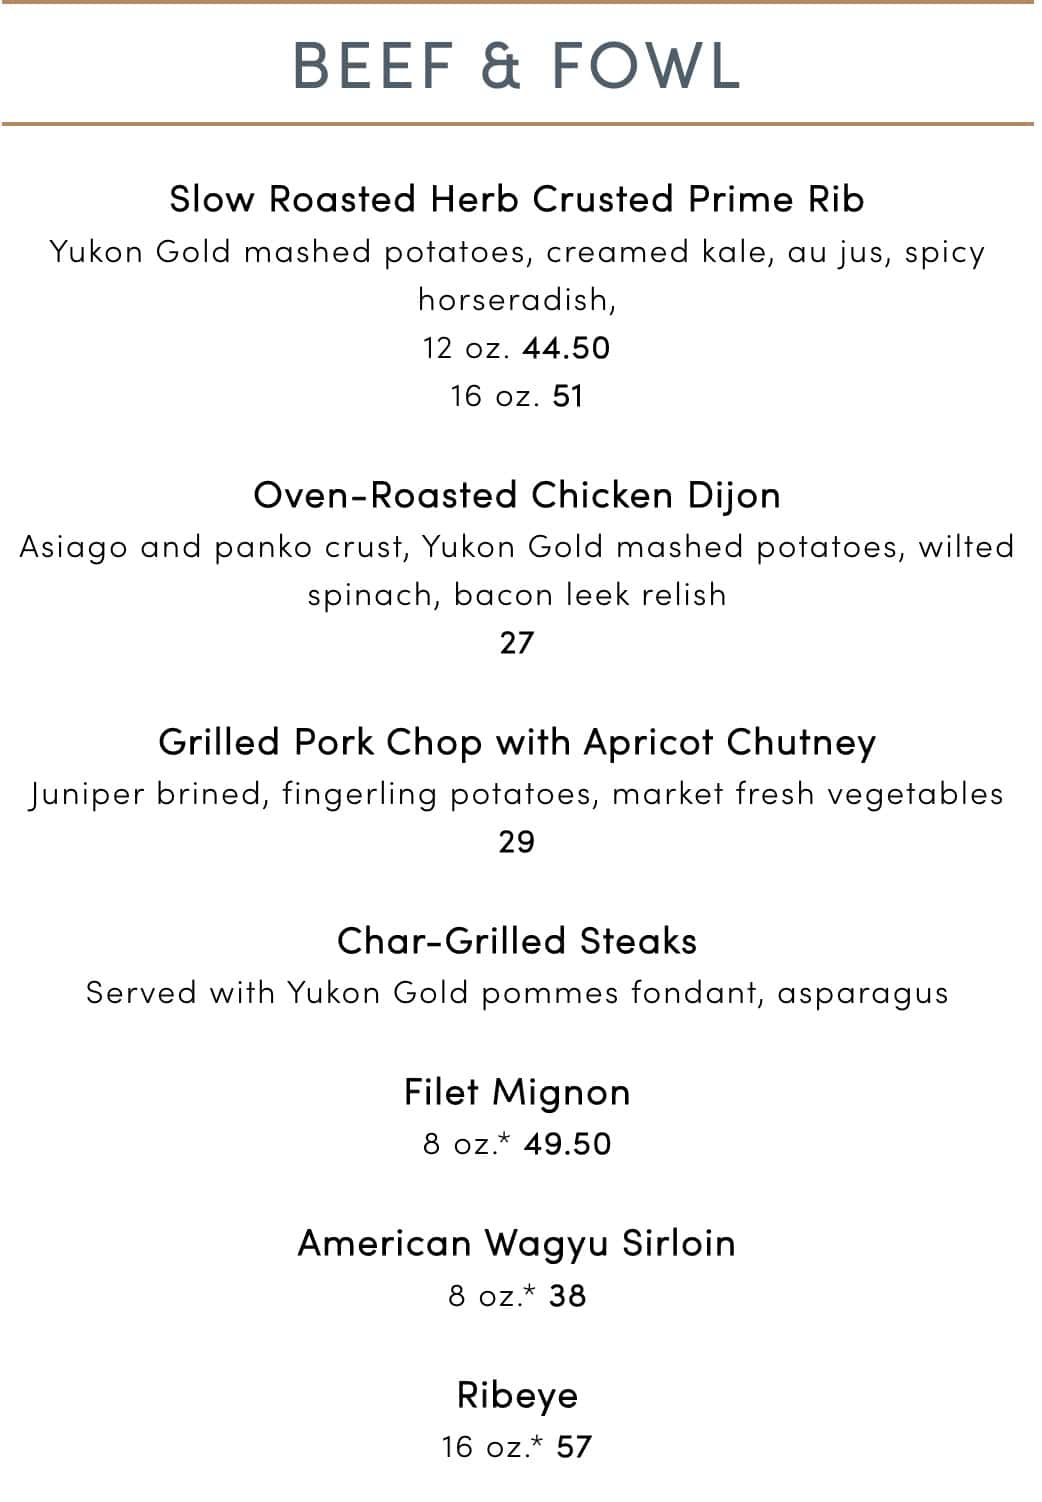 Simon and Seafort's Saloon and Grill Dinner Menu